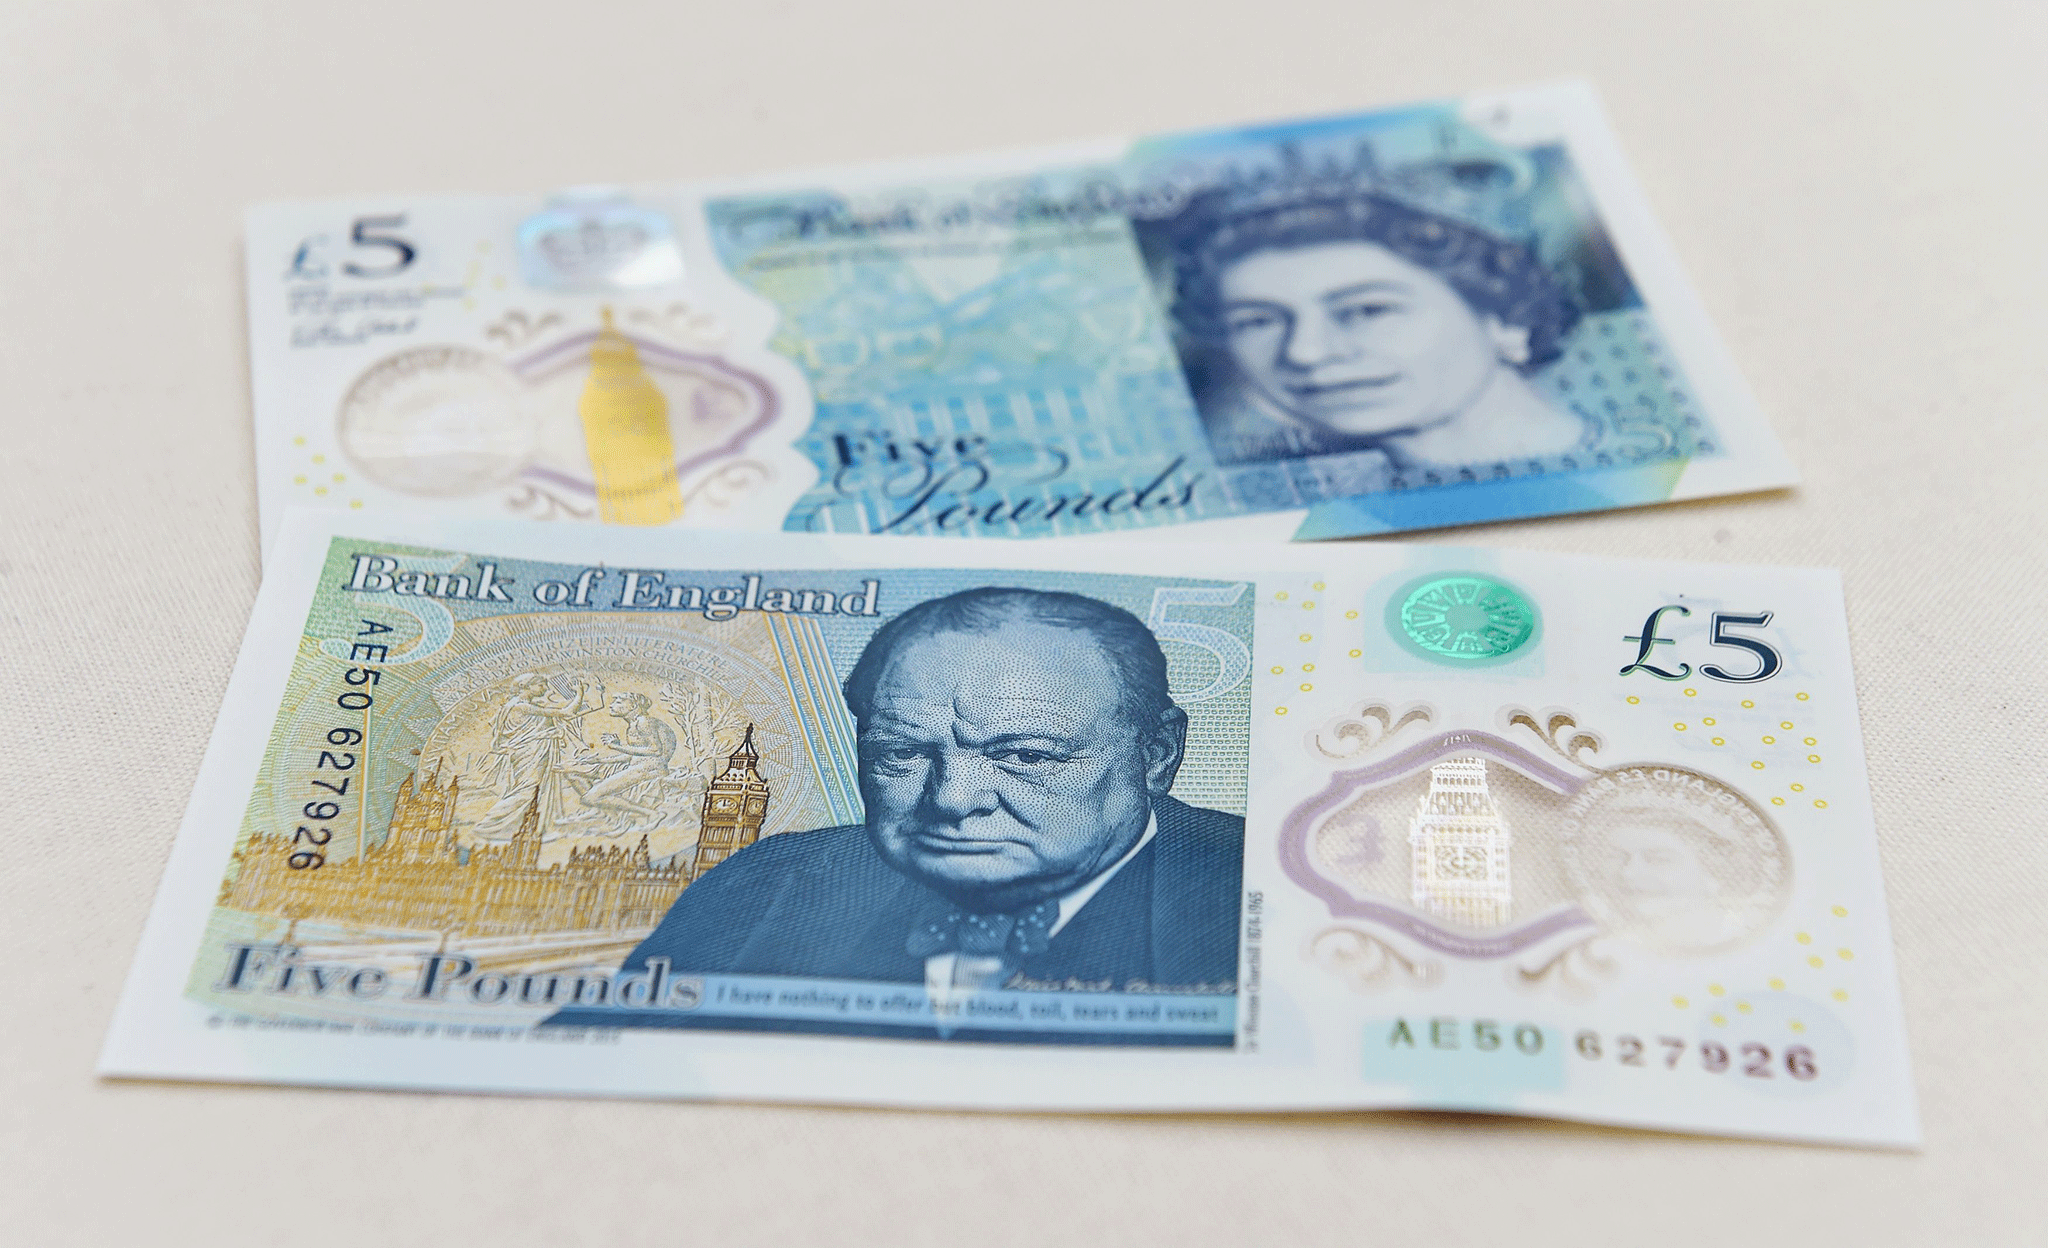 Read more

Bank of England's first polymer banknote enters circulation